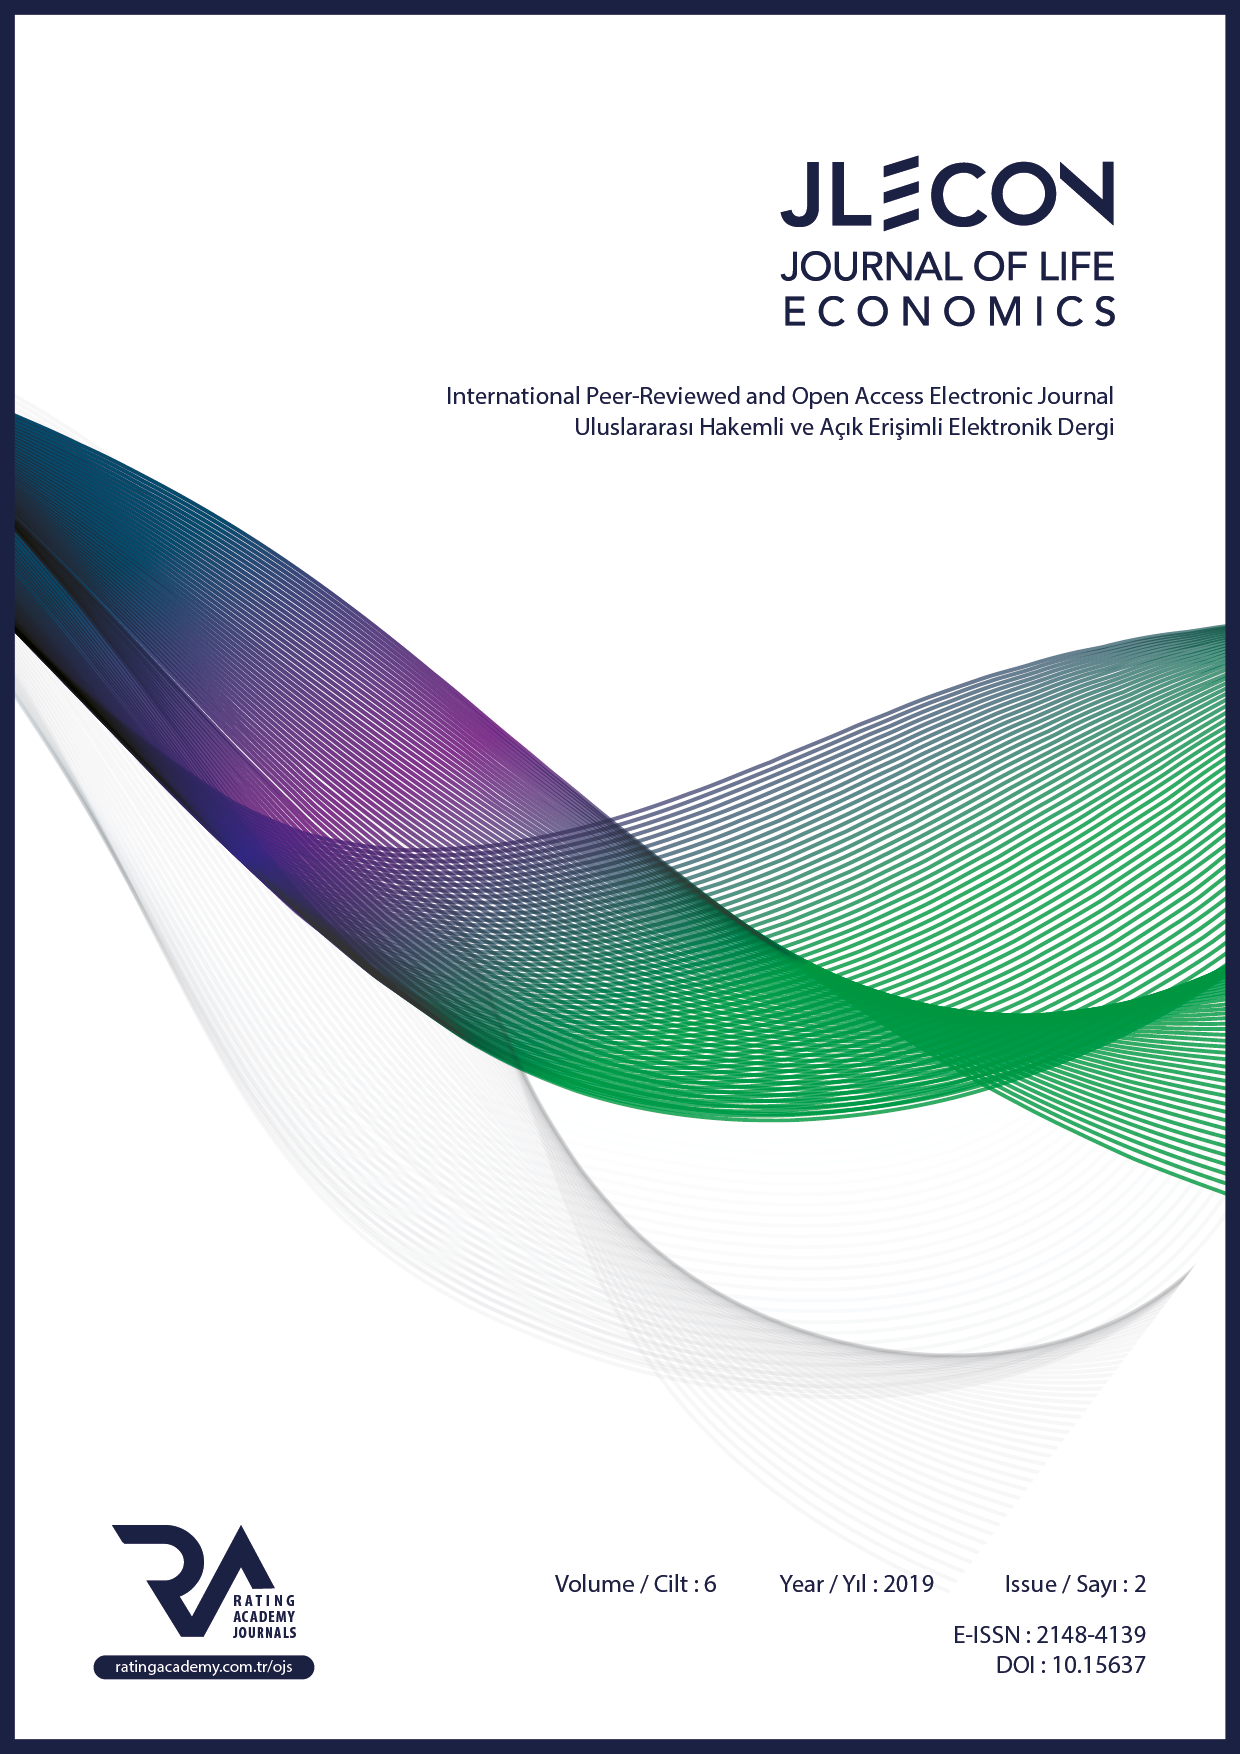 THE ECONOMIC AND FISCAL PERFORMANCE OF TURKEY AND WESTERN BALKANS IN THE PROCESS OF MEMBERSHIP TO THE EUROPEAN UNION: AN ASSESSMENT ON POST-GLOBAL CRISIS PERIOD Cover Image